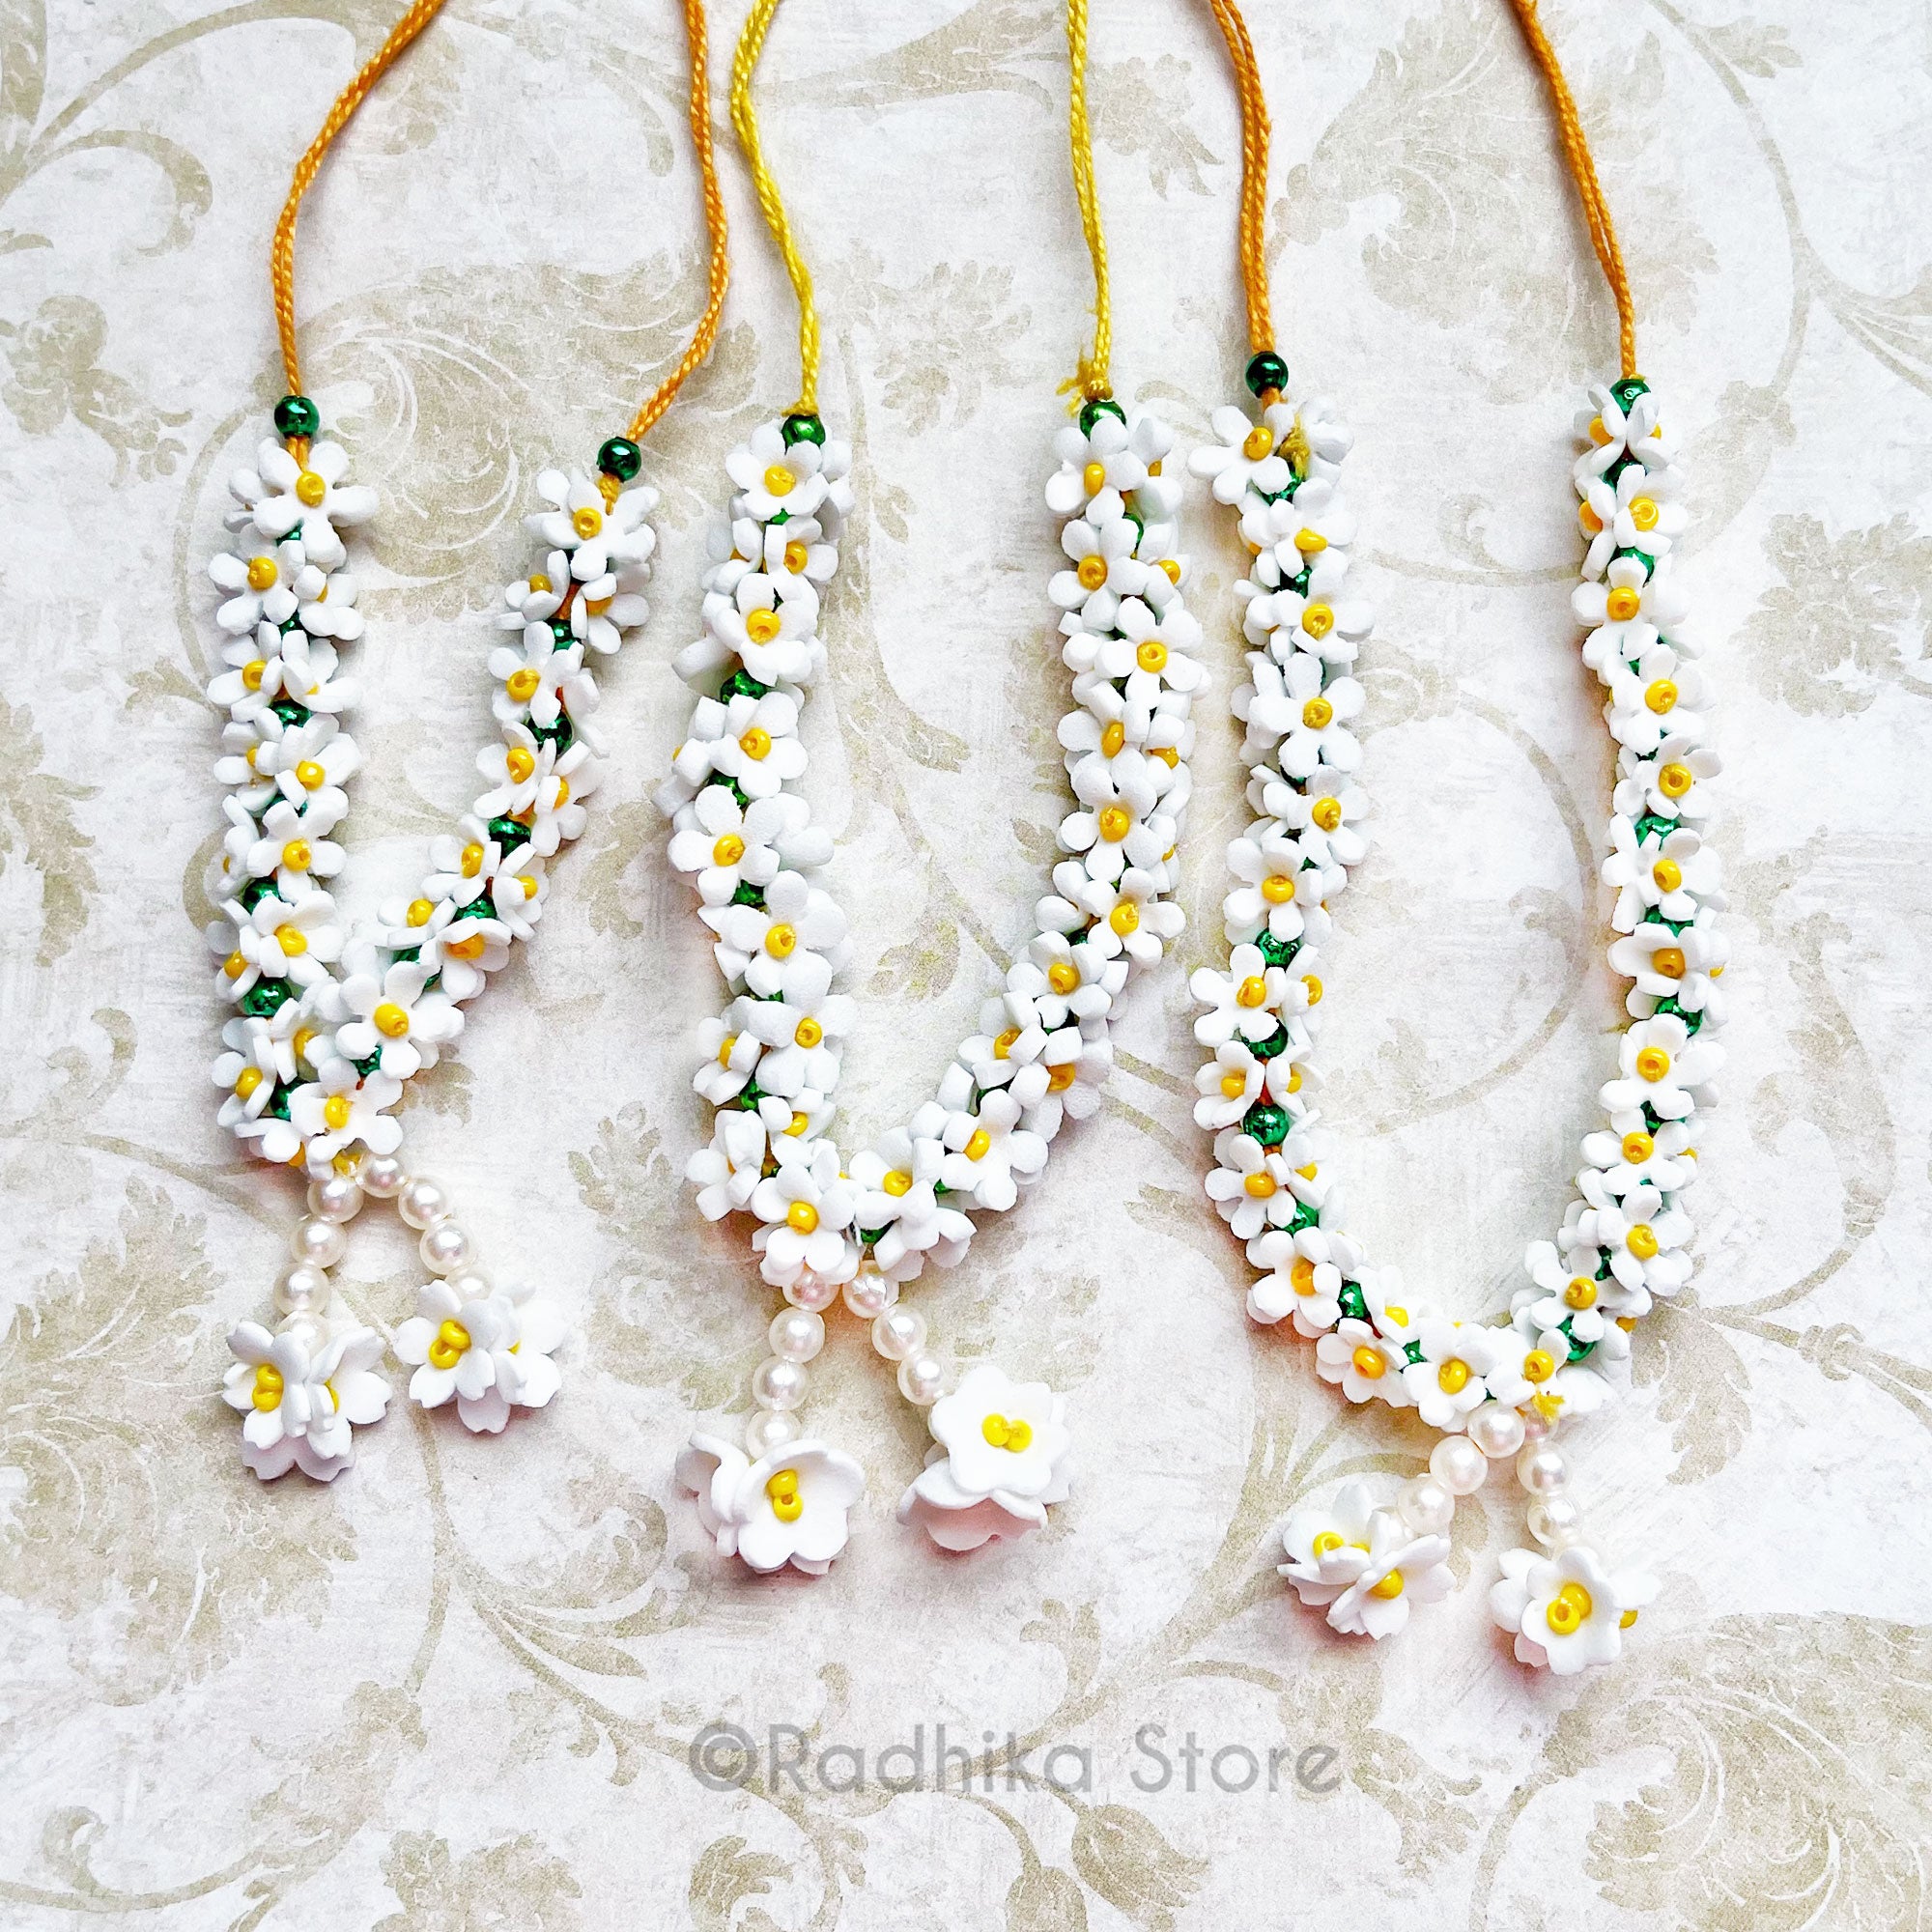 Pure White With Yellow Center - Vrindavan Flowers - Deity Garland -Flower Jewelry - Choose Size -